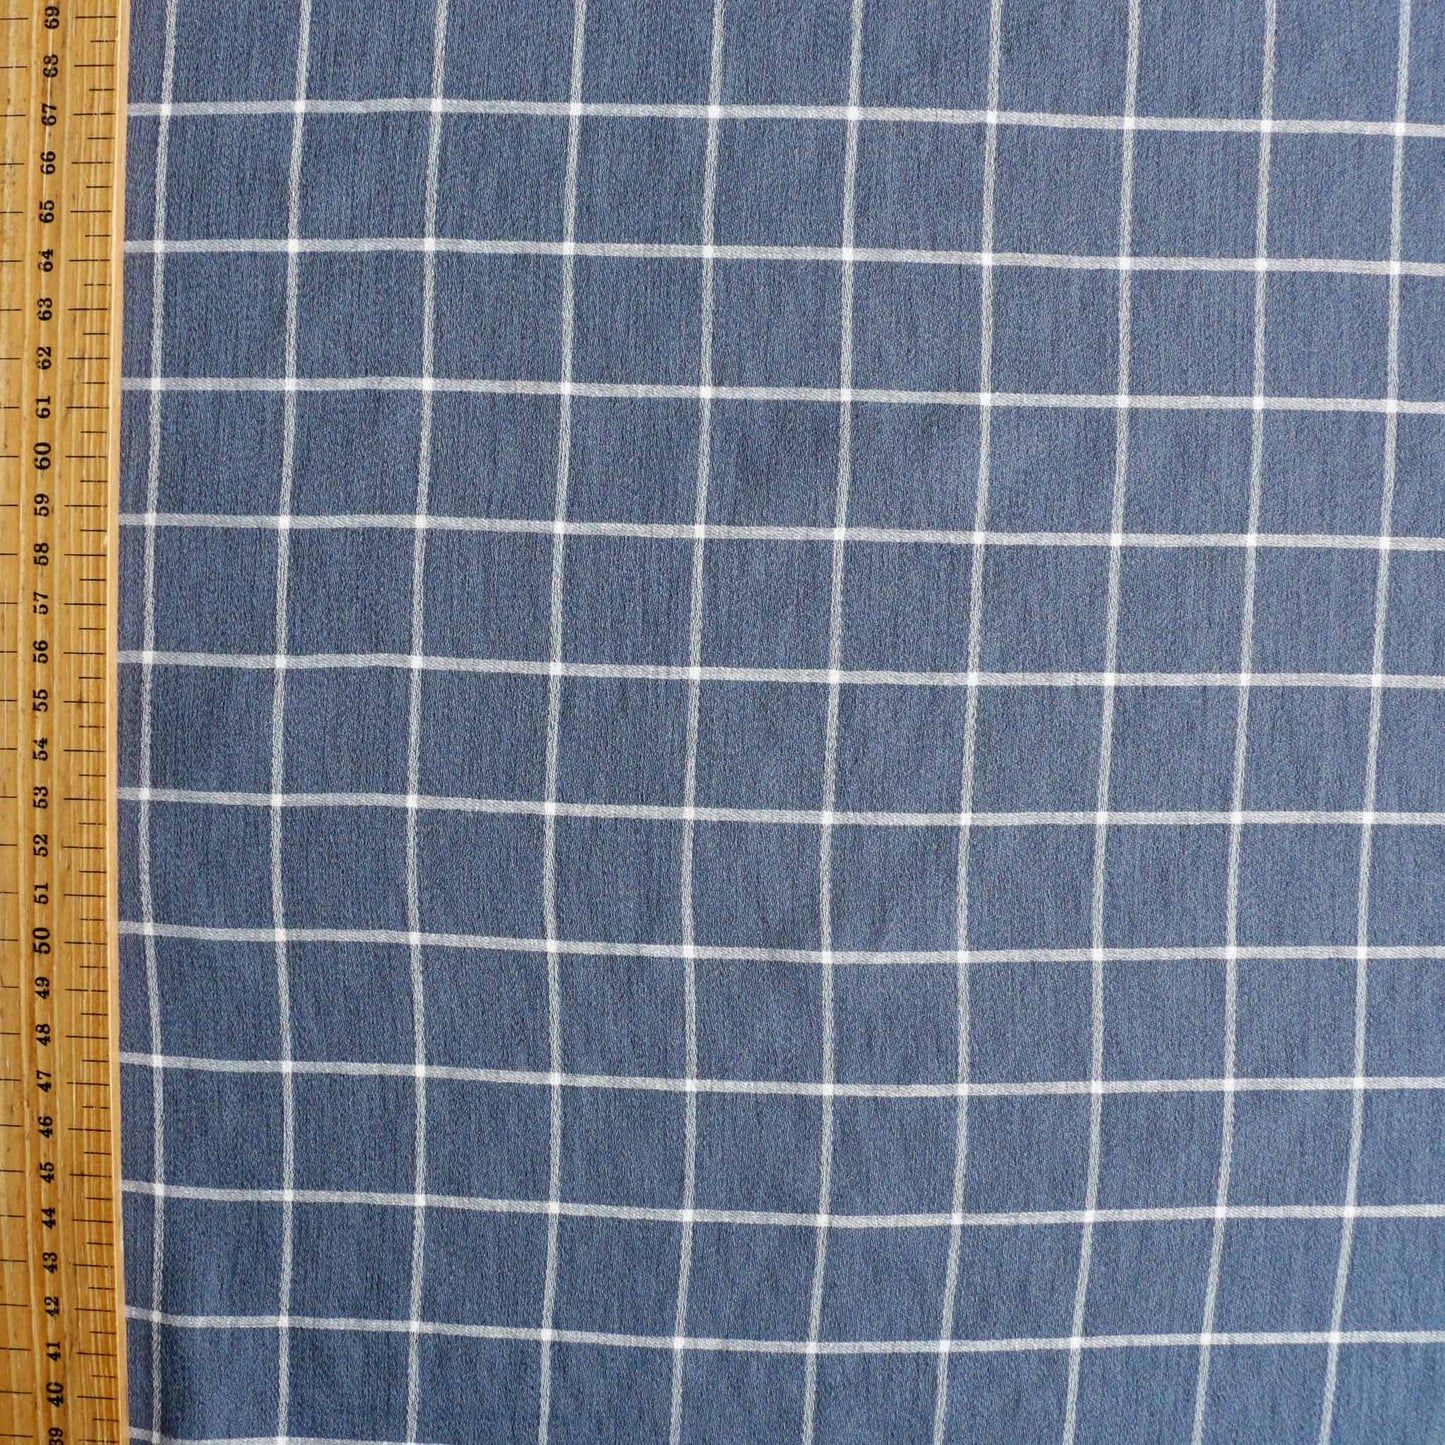 metre viscose rayon voile dressmaking fabric in blue and white check pattern